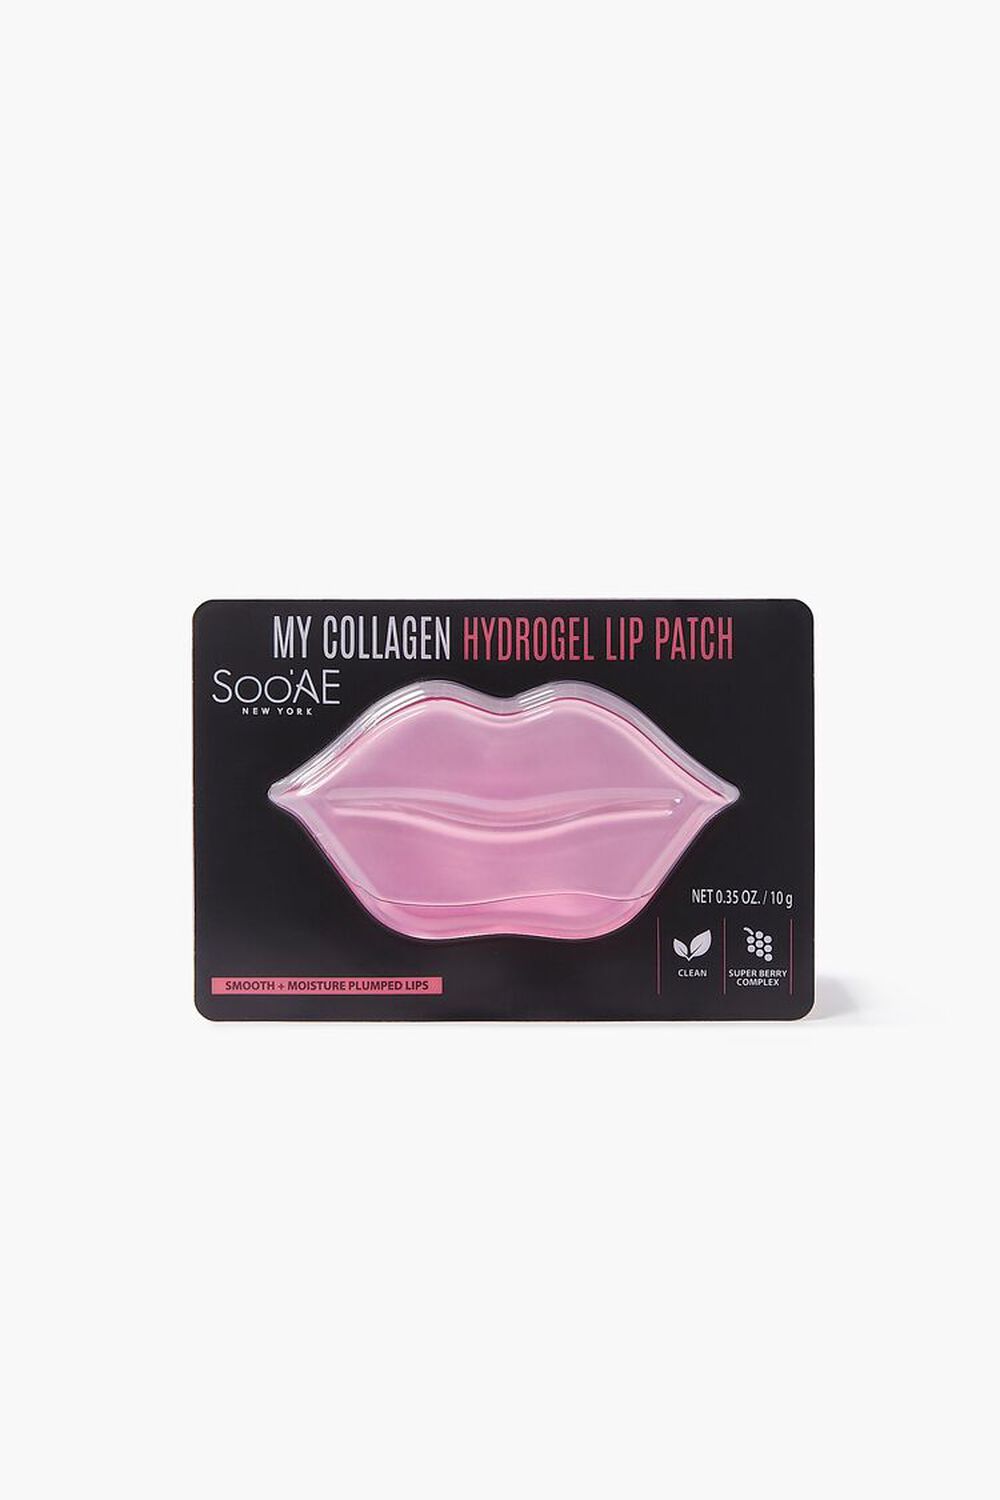 SHADOW GREY/WHITE SooAe Collagen Lip Patch, image 1